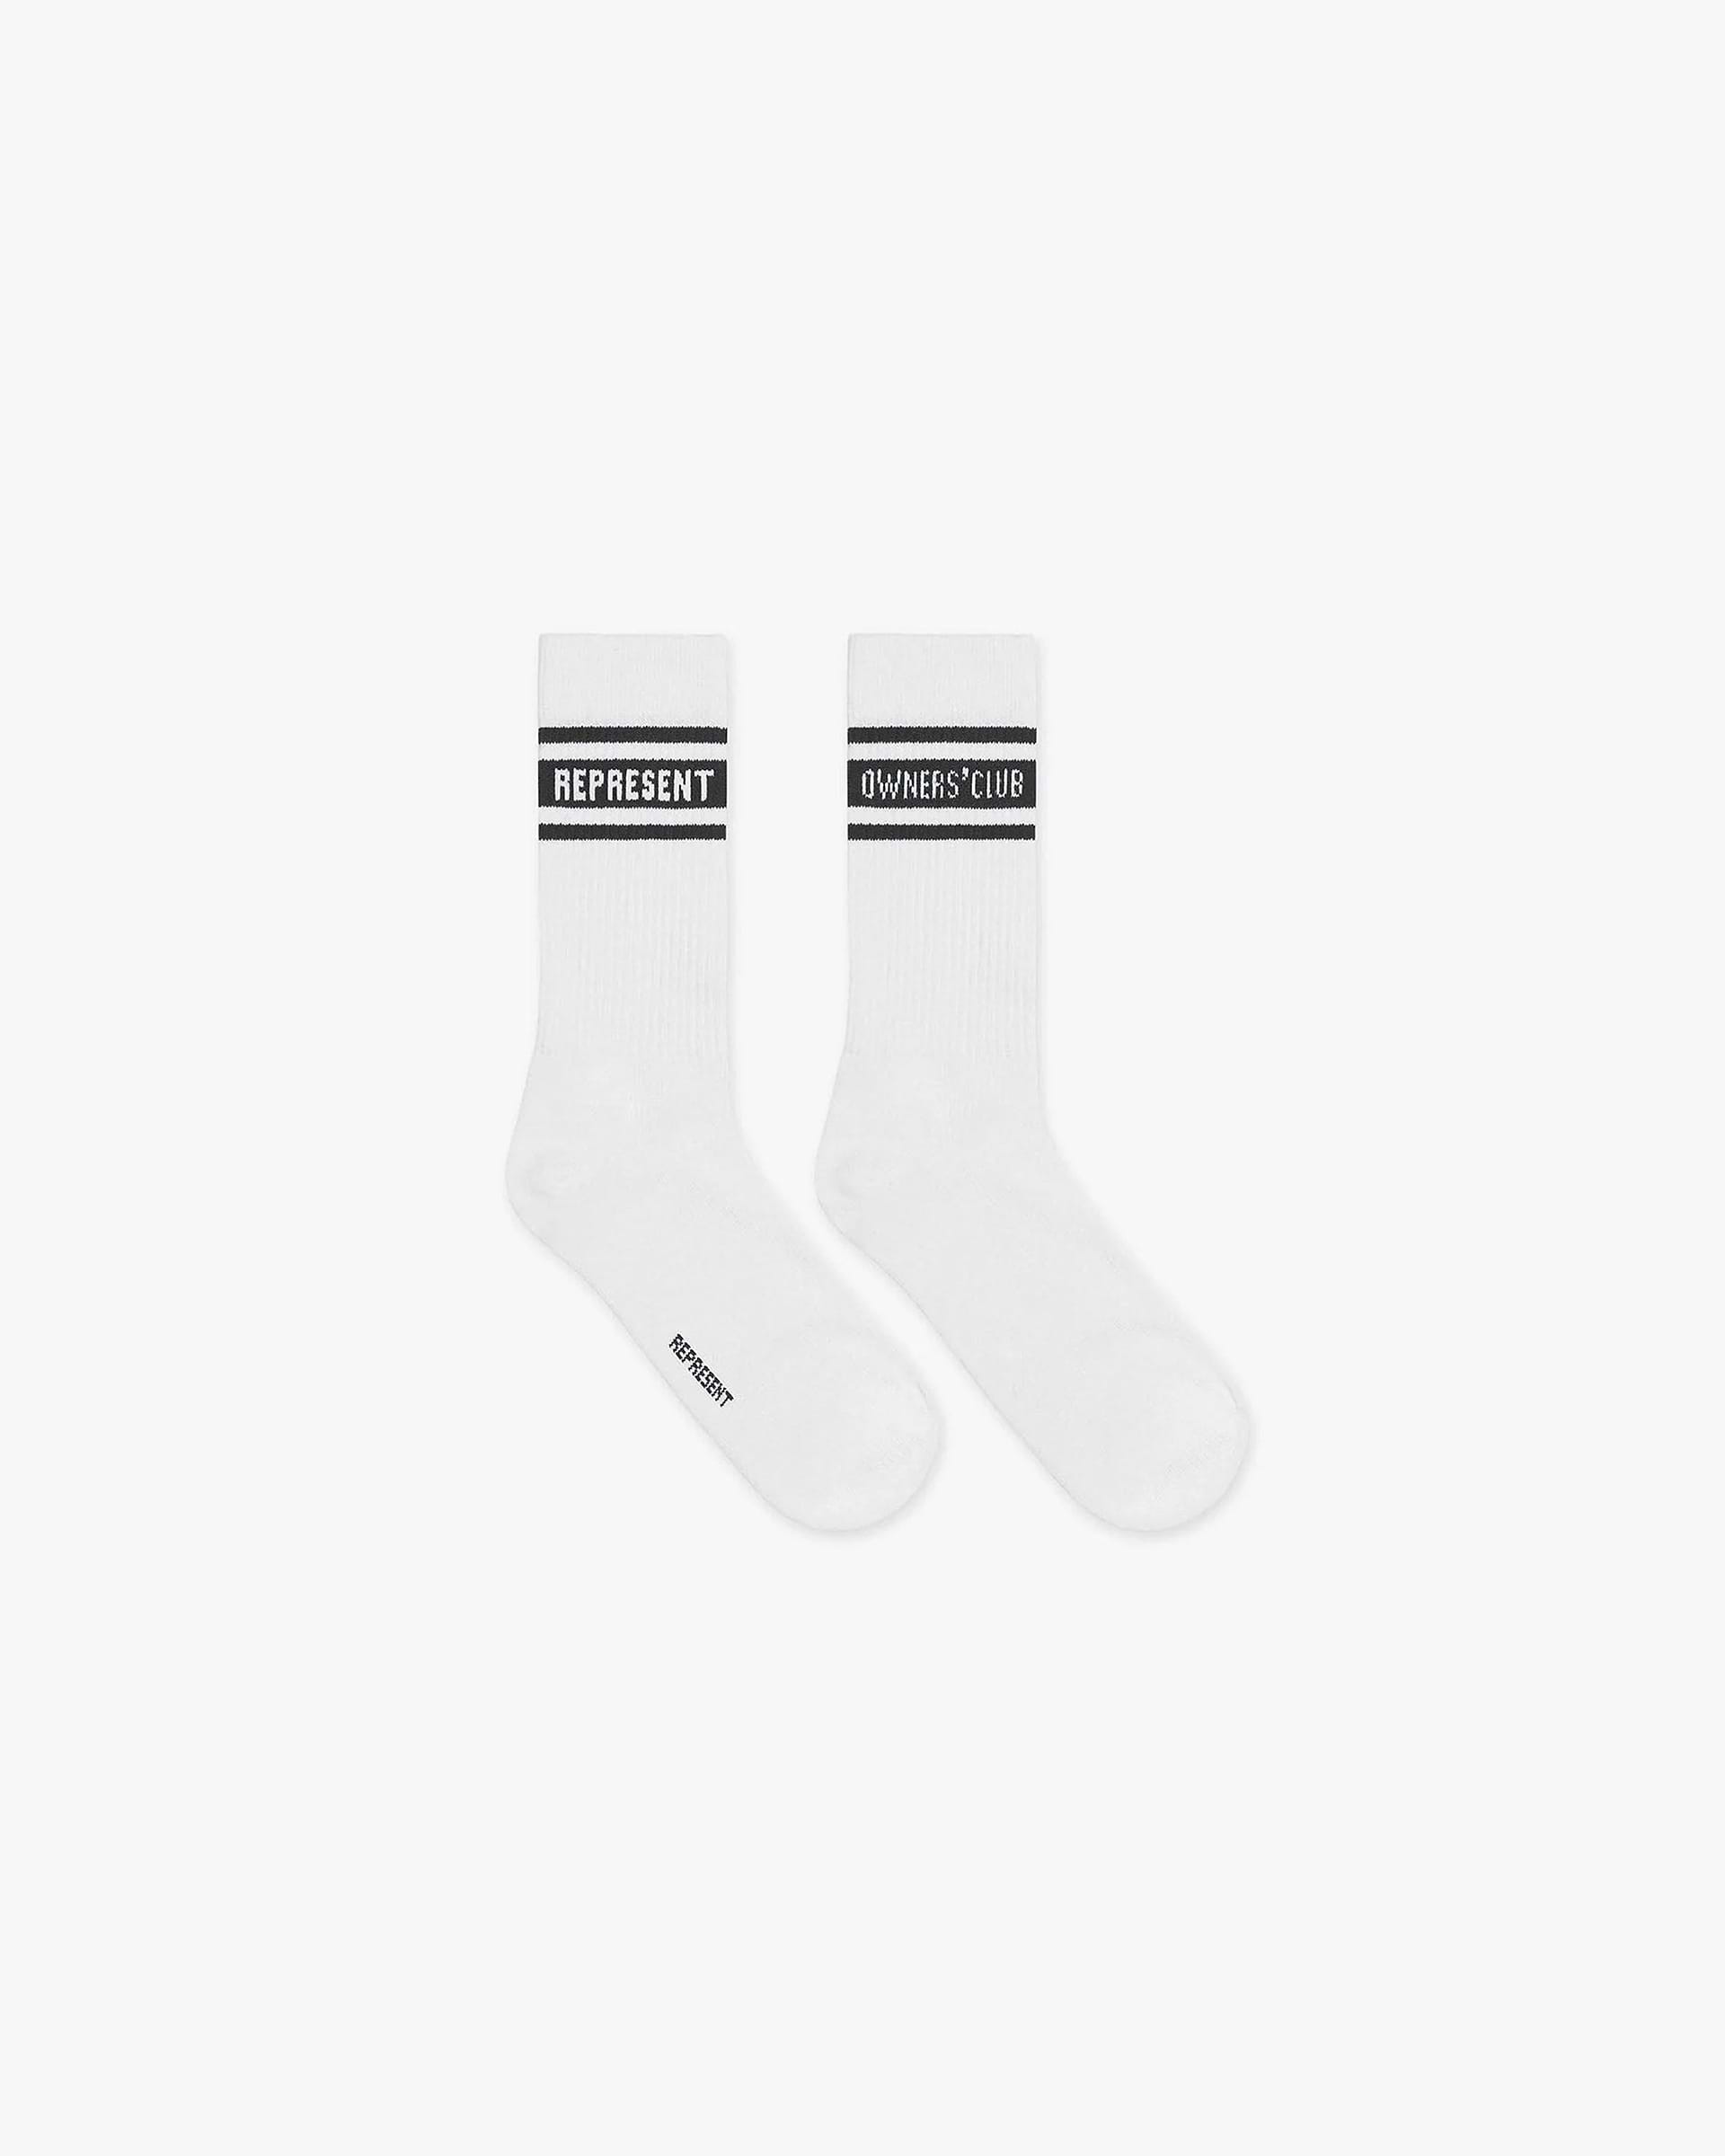 Represent Owners Club Socks | Flat White Black Accessories Owners Club | Represent Clo